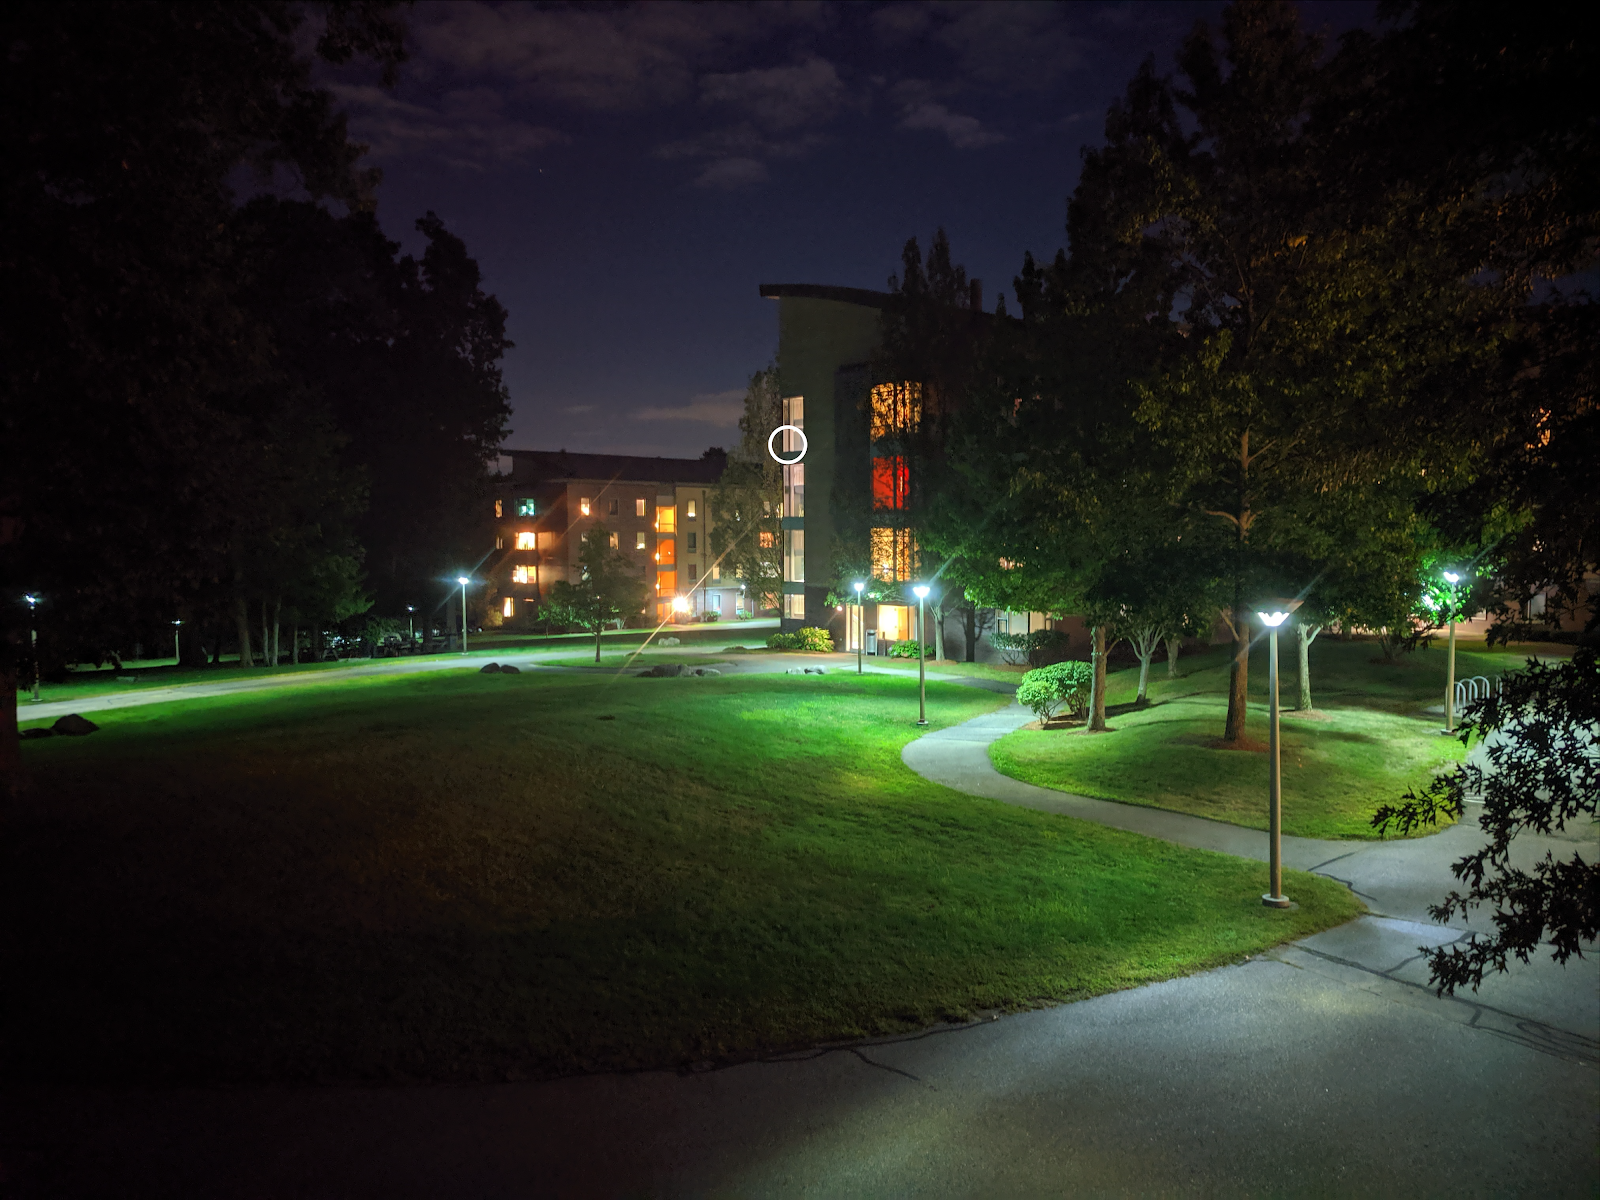 The outside of Olin's West Hall residence hall at night, with a stairwell on the fourth floor circled for emphasis.